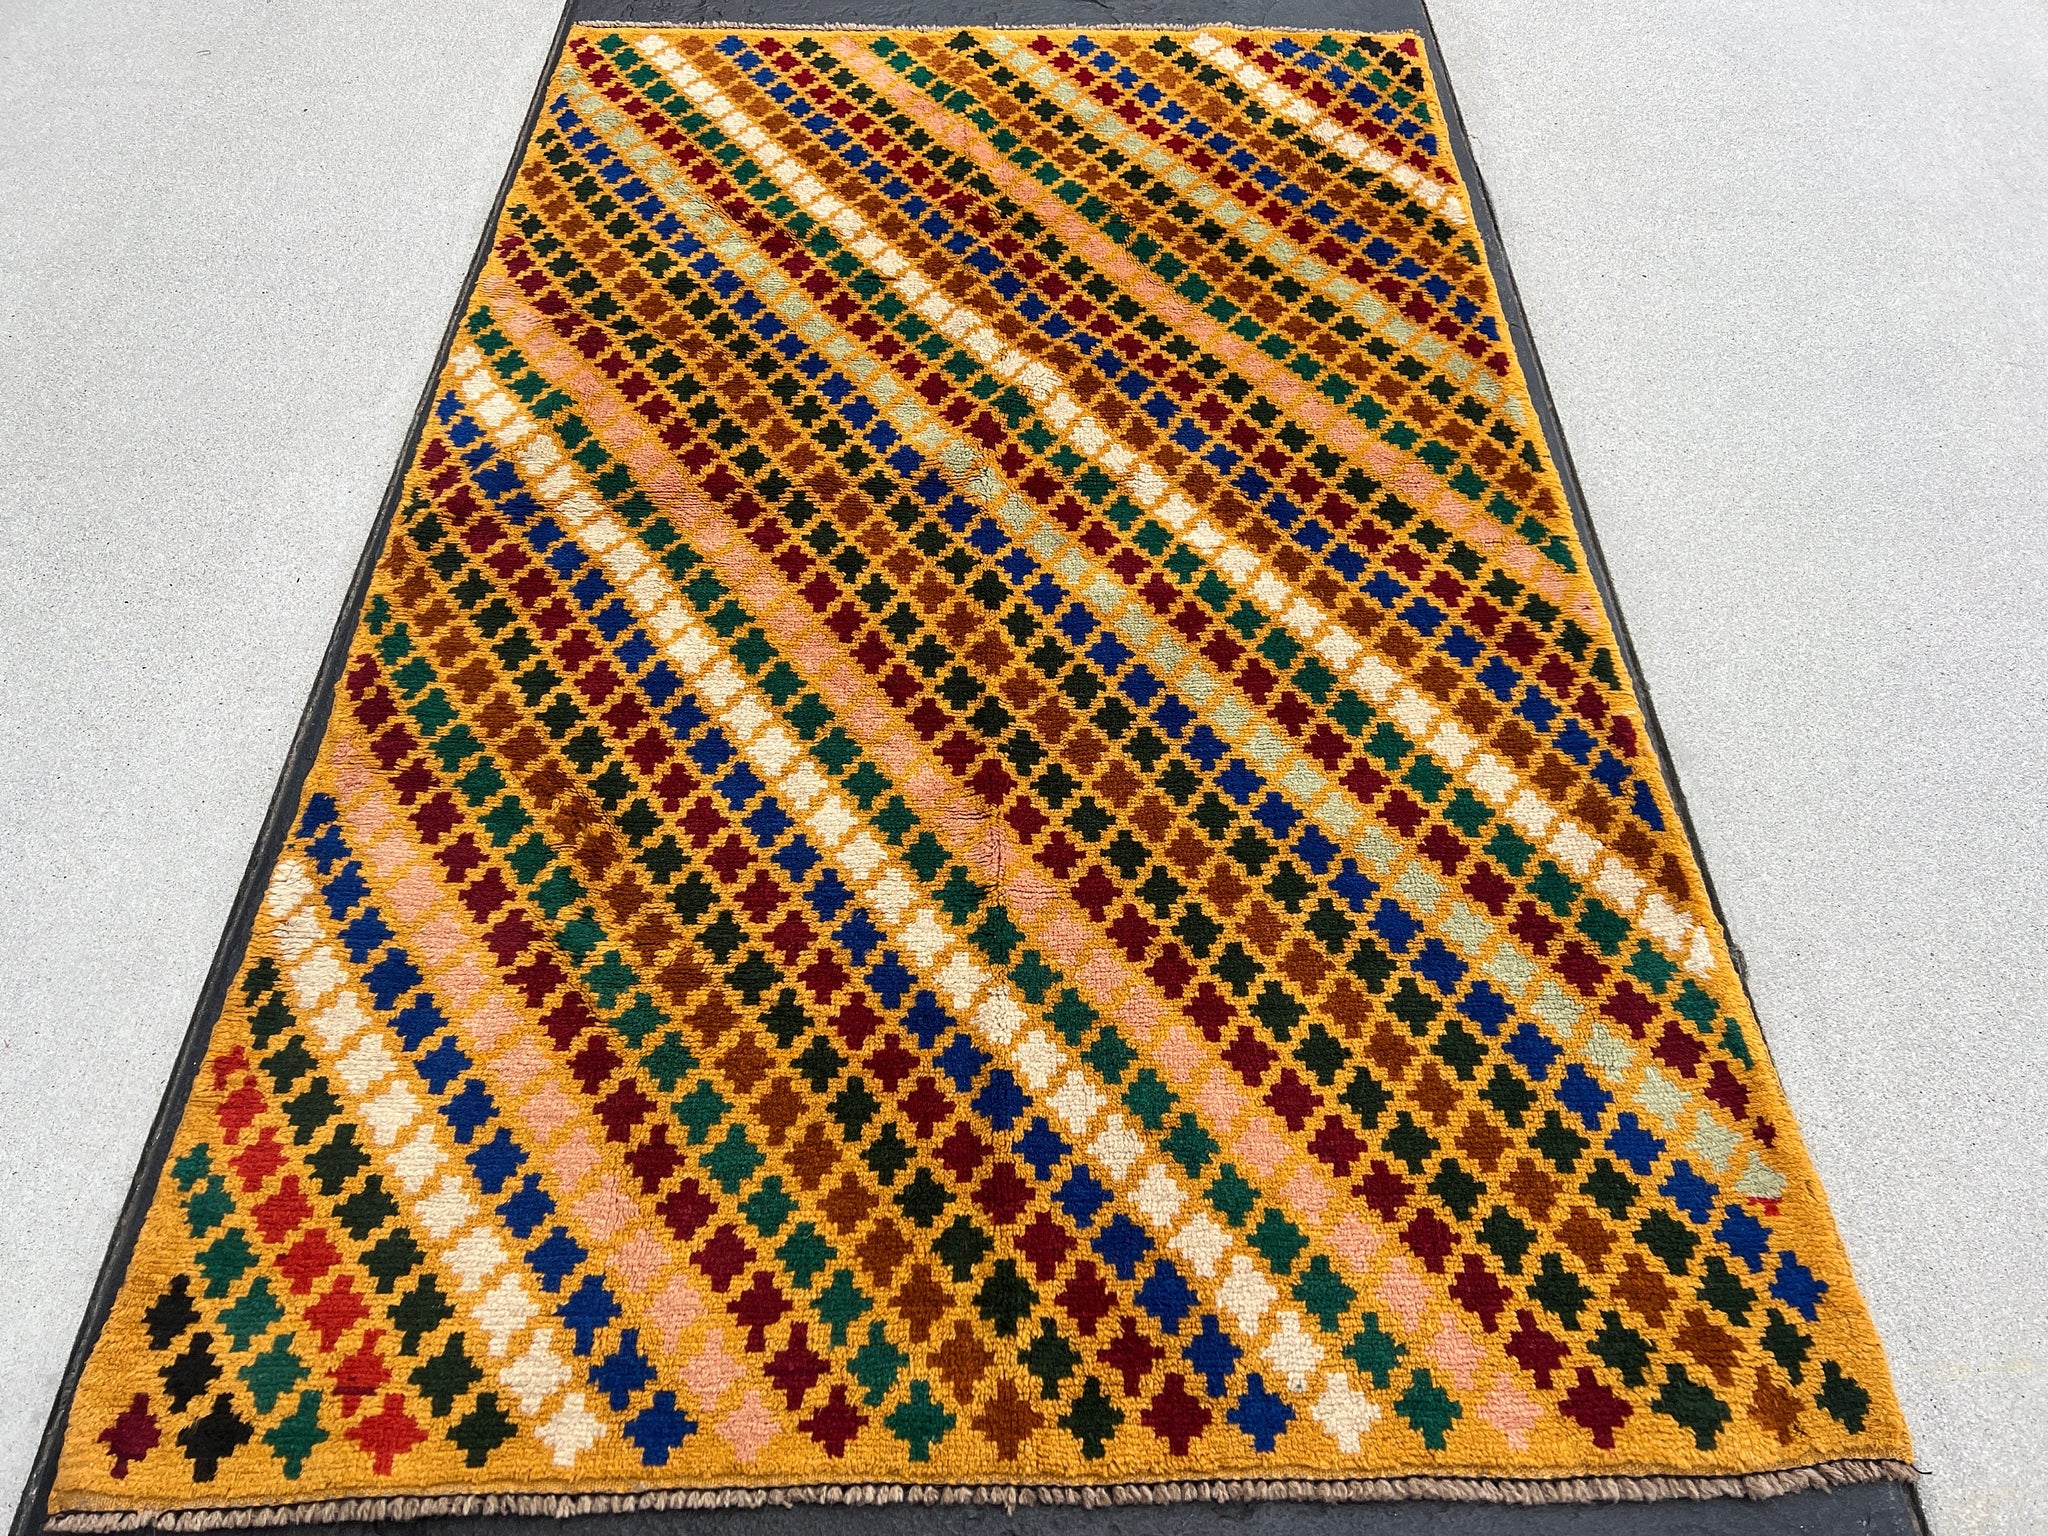 4x6 (120x180) Handmade Vintage Baluch Afghan Rug | Mustard Gold Blue Forest Green Turquoise Salmon Pink Taupe Crimson Red Ivory | Geometric